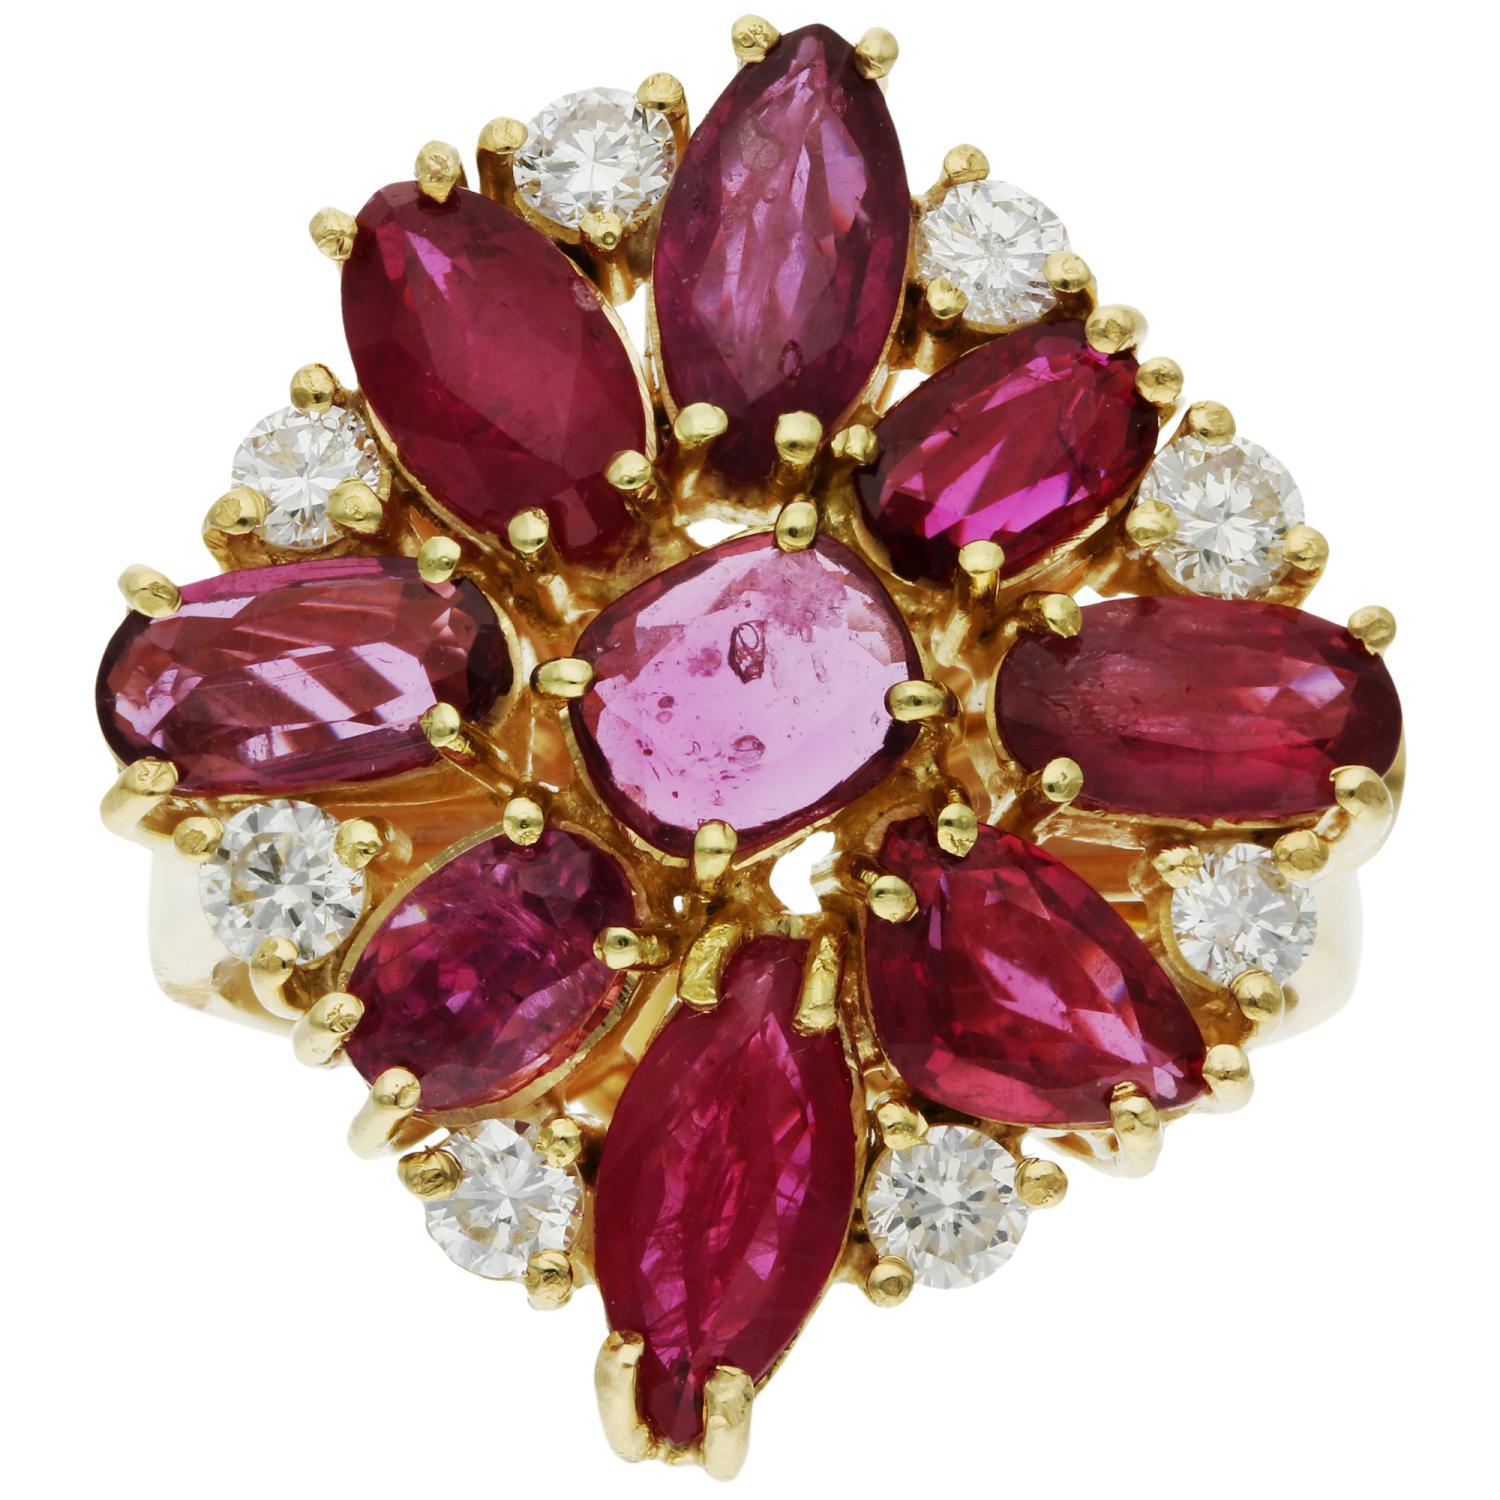 14ct Yellow Gold 2.00ct Ruby & 0.50ct Diamond Cocktail Ring

Ignite your style with our Pre-loved 14ct Yellow Gold Ruby & Diamond Ring, a flamboyant masterpiece perfect for both dress and cocktail occasions. This exquisite ring showcases a